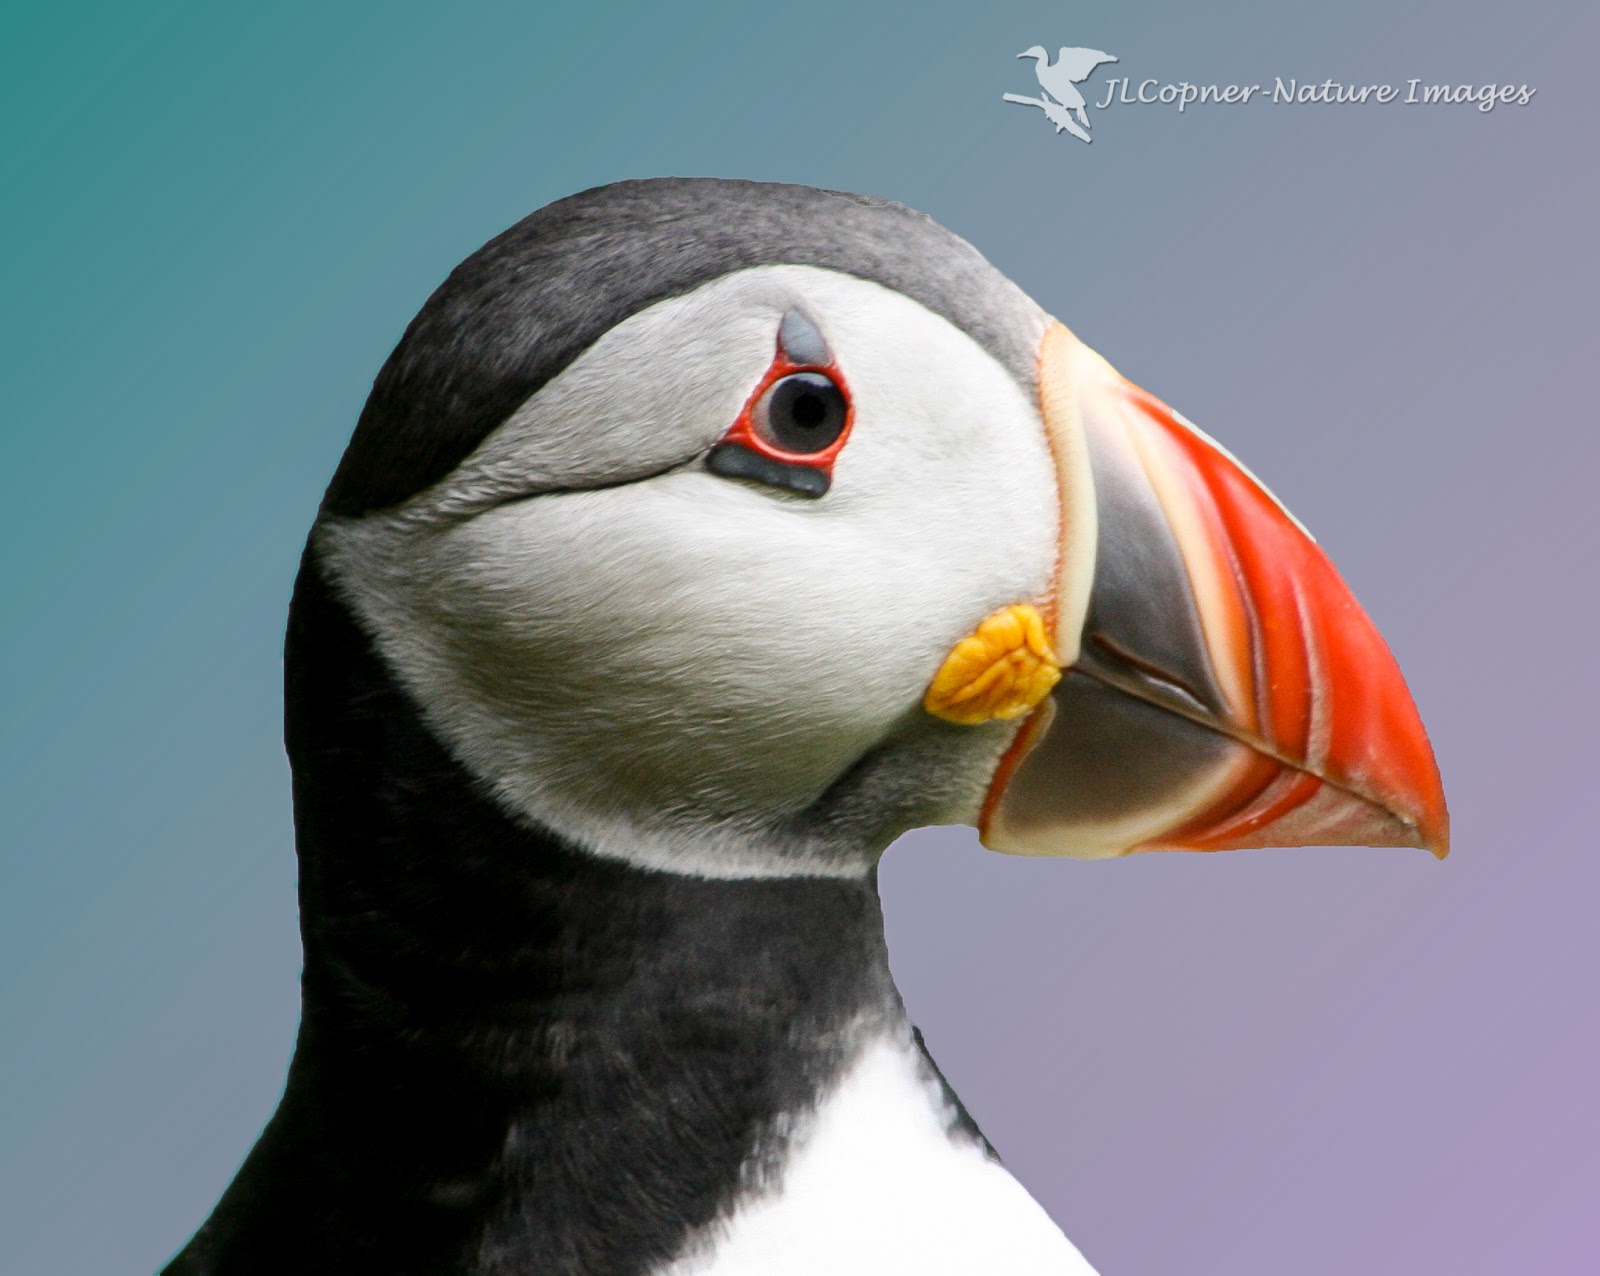 Puffins of the Skellig isles ,Ireland: Puffin portrait